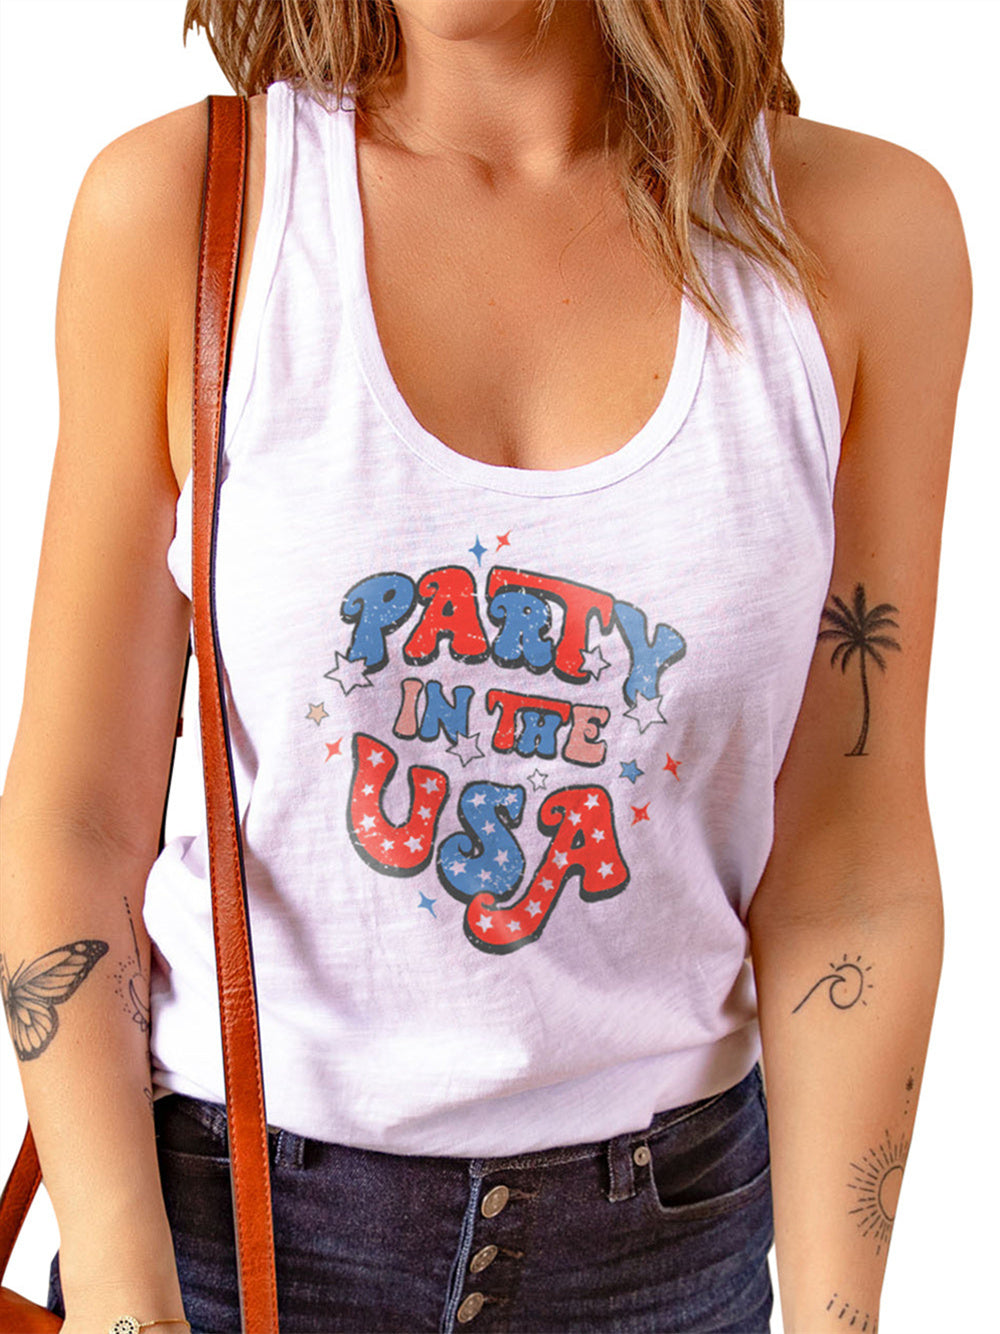 American Flag Printed Vest Party